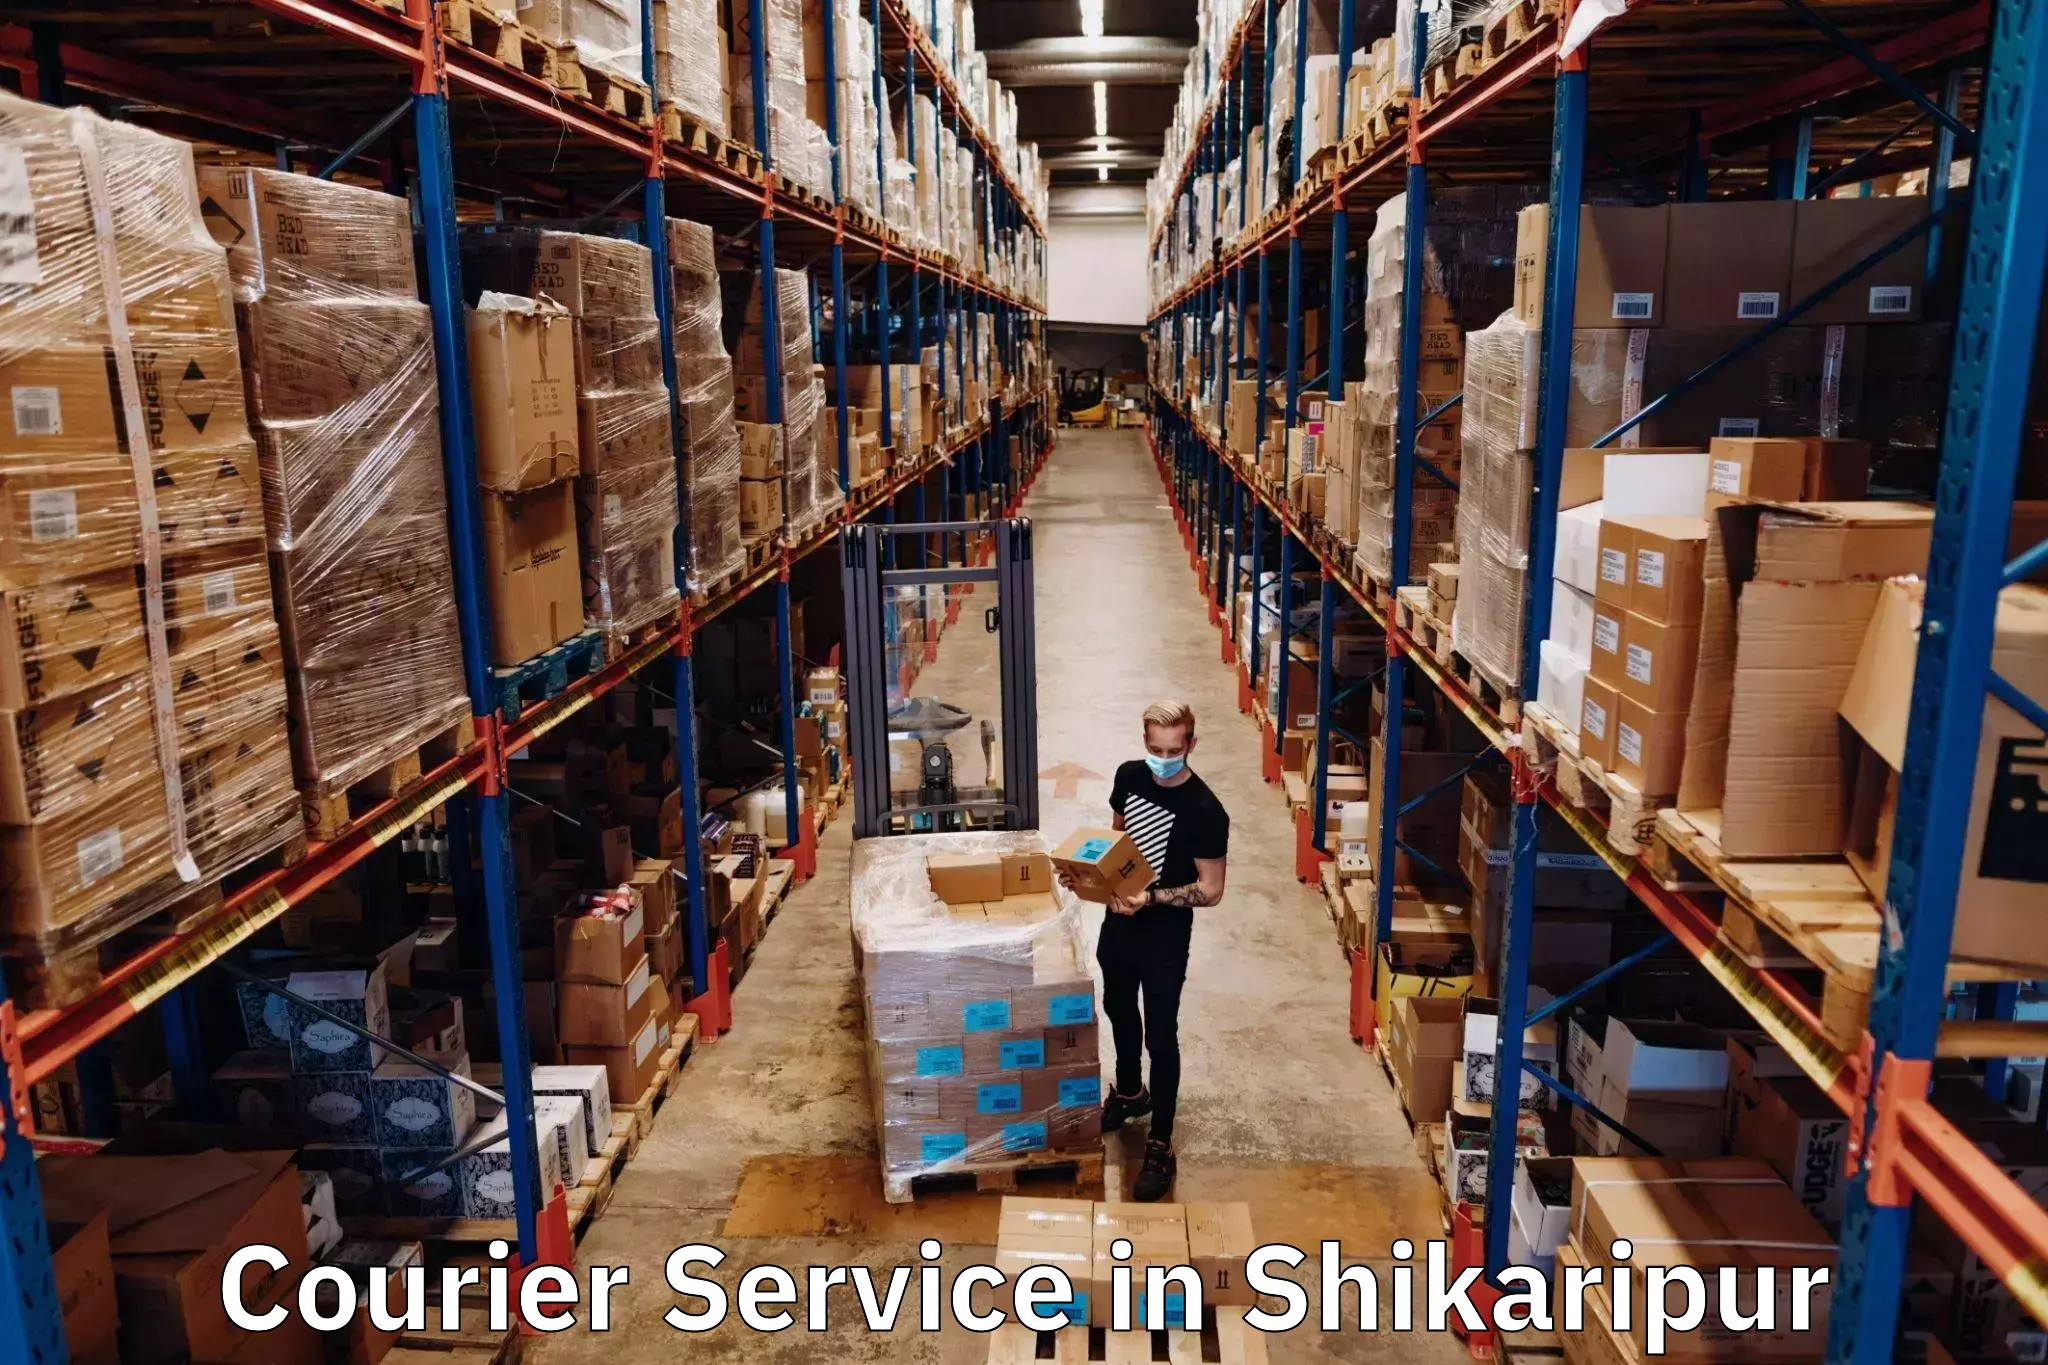 Logistics and distribution in Shikaripur